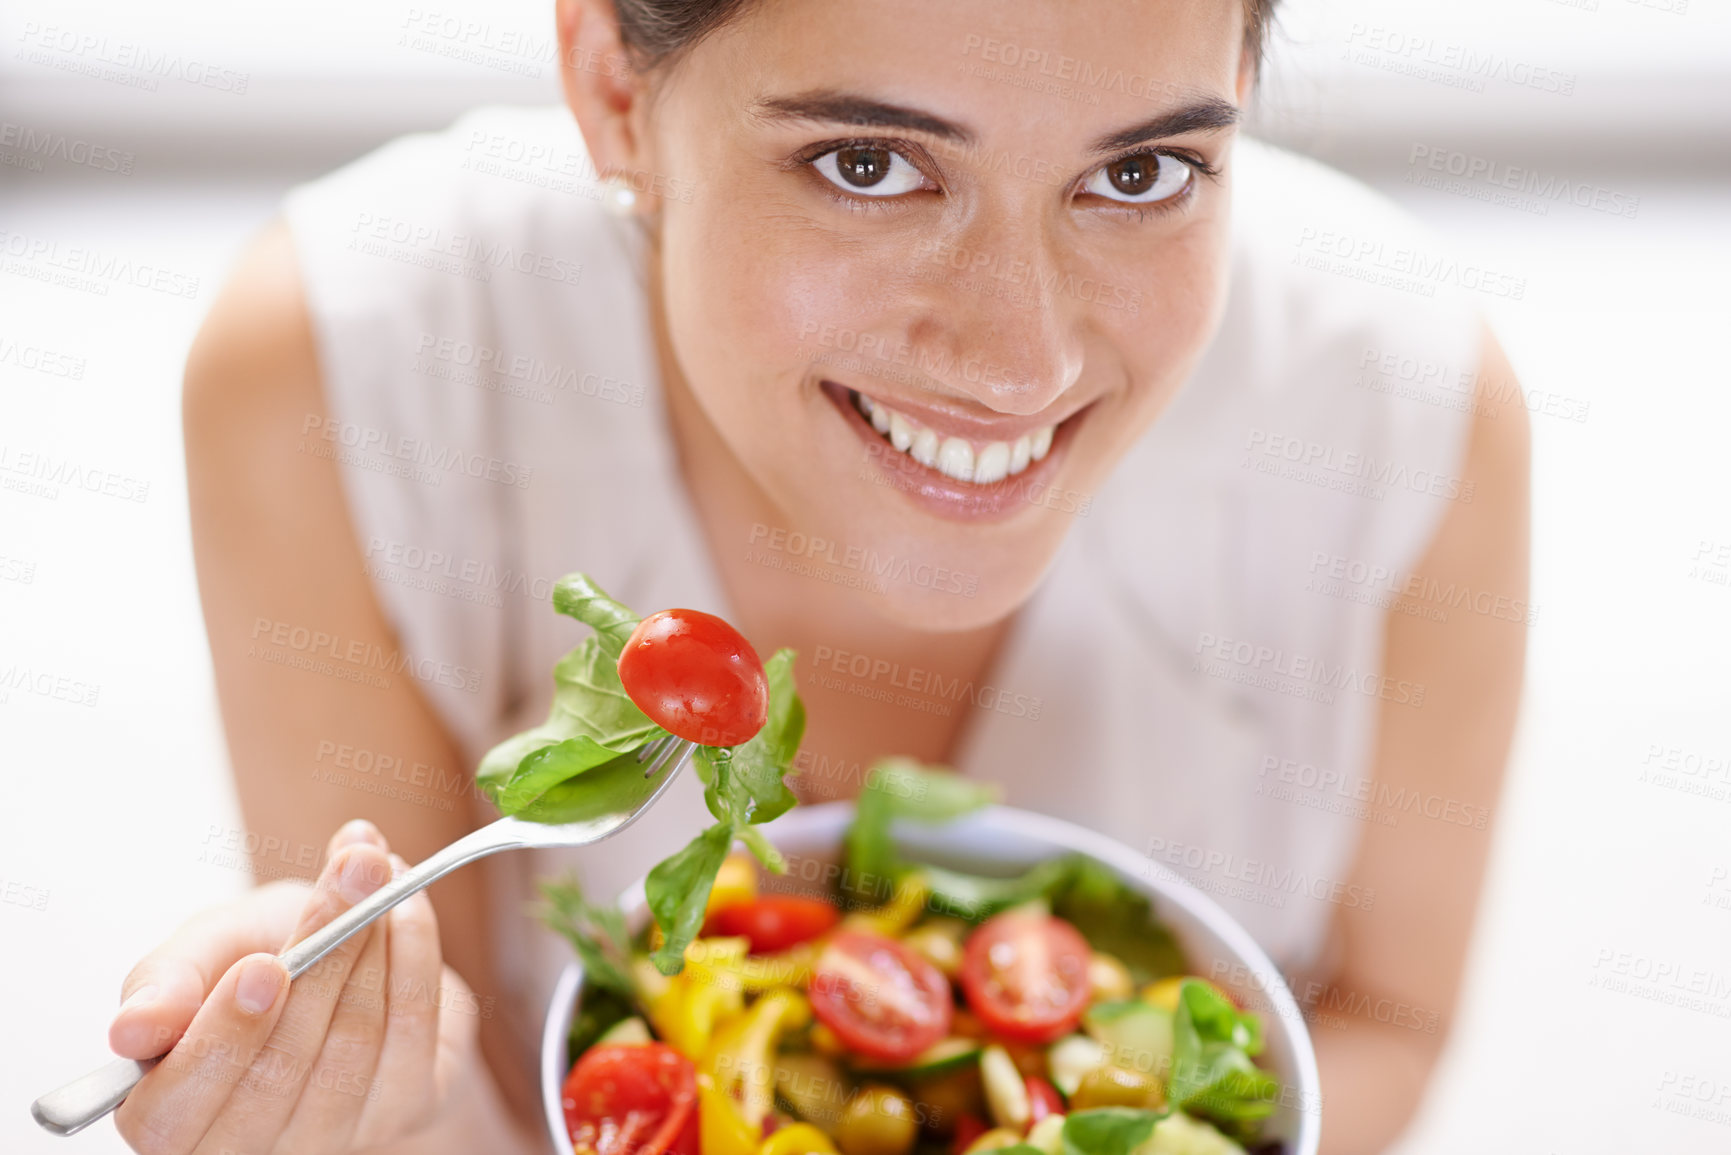 Buy stock photo High angle portrait of an attractive young woman eating a bowl of salad